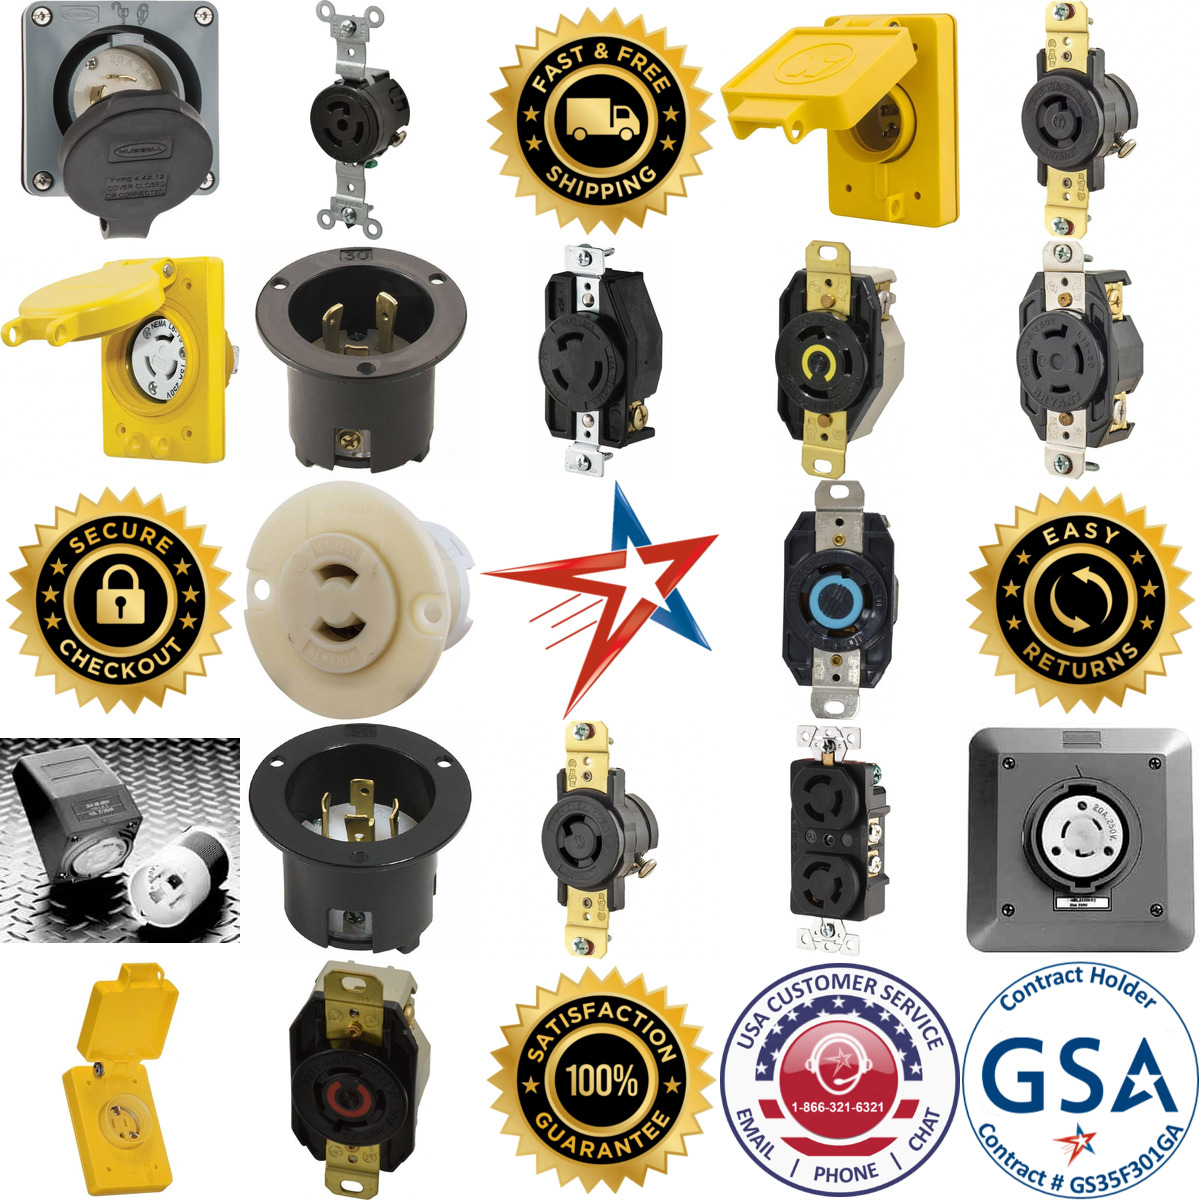 A selection of Twist Lock Receptacles products on GoVets